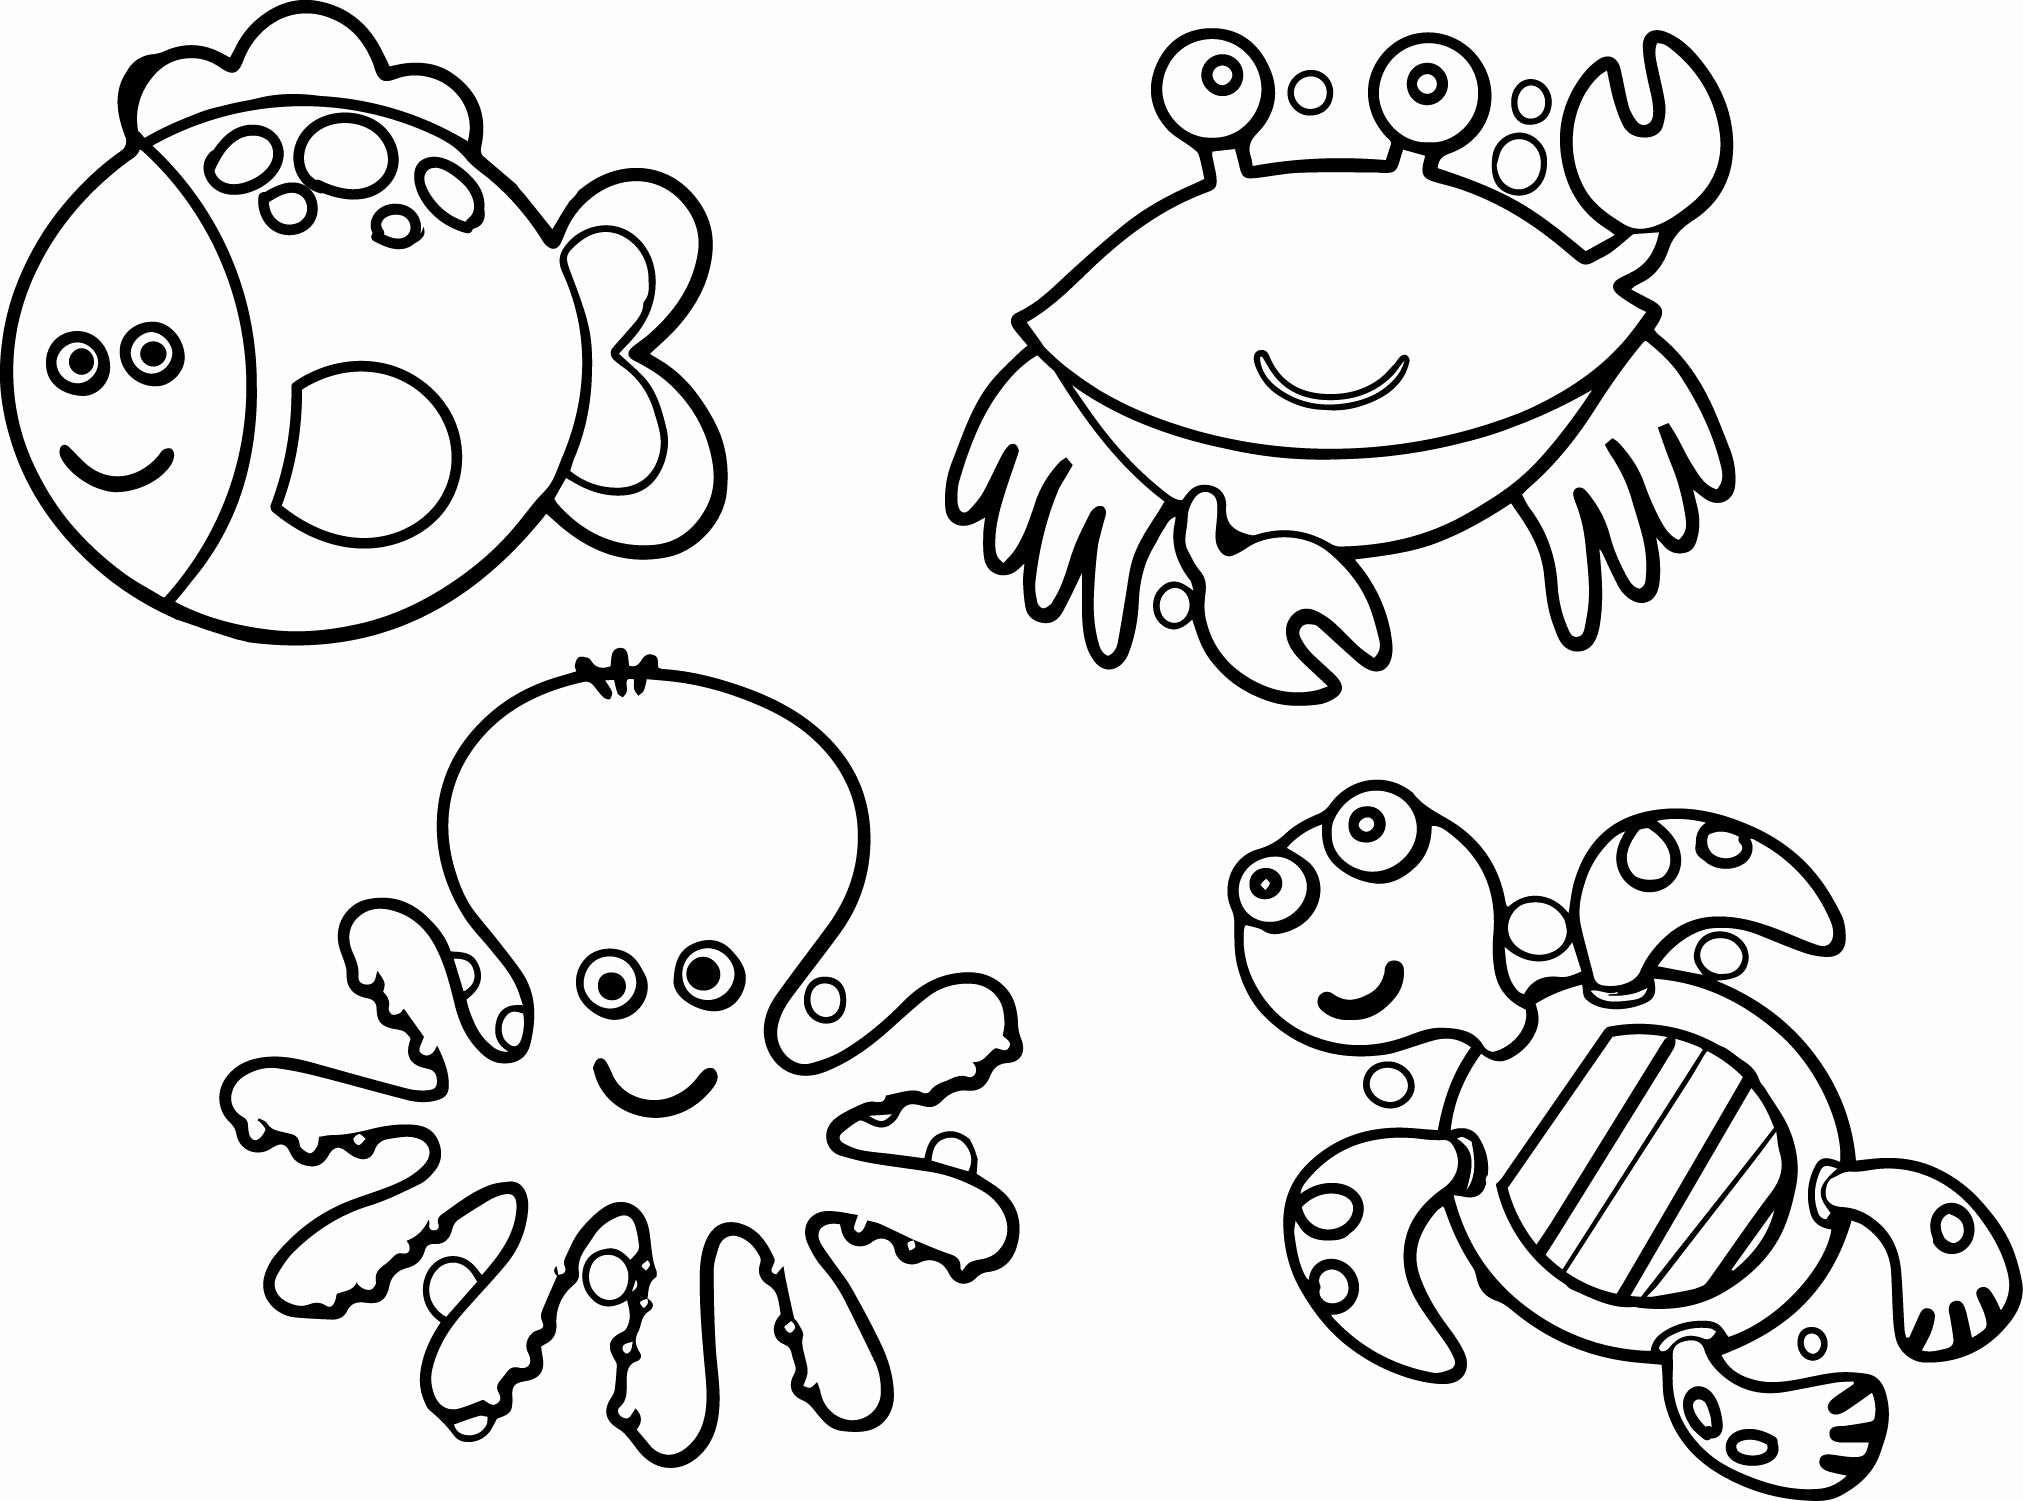 706 Cute Free Printable Sea Creatures Coloring Pages with Animal character